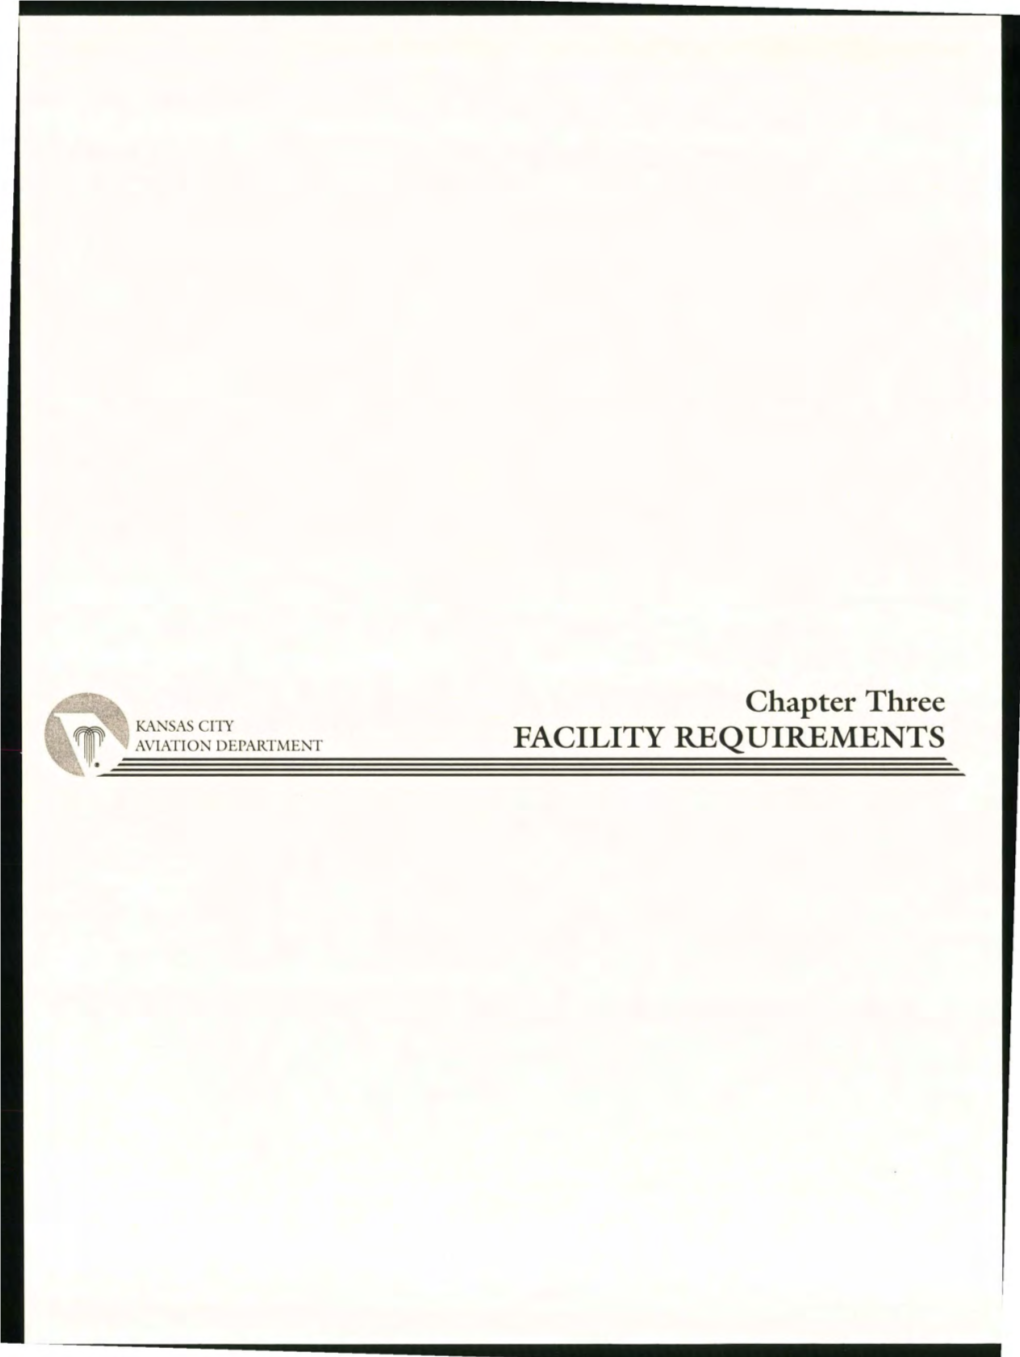 Chapter Three FACILITY REQUIREMENTS